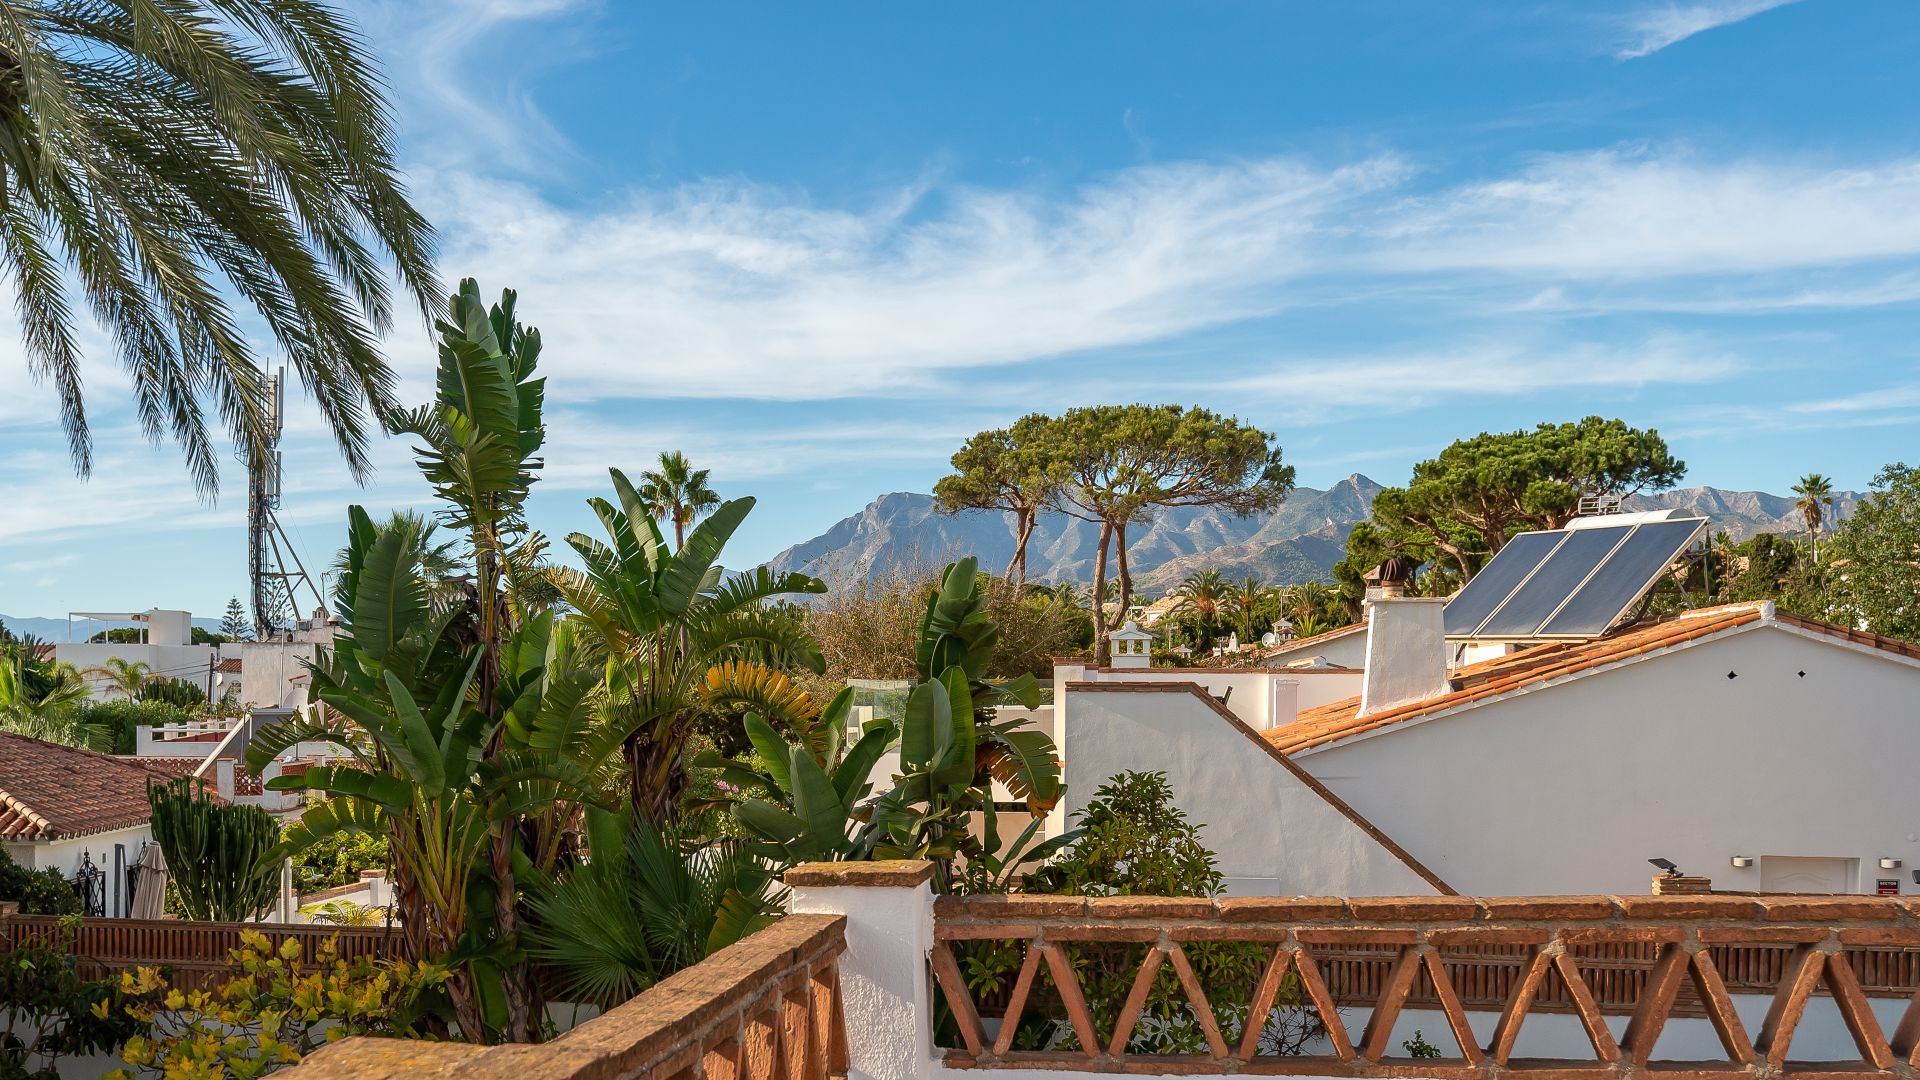 Charming villa bungalow style a few metres from the beach in Costabella | Engel & Völkers Marbella